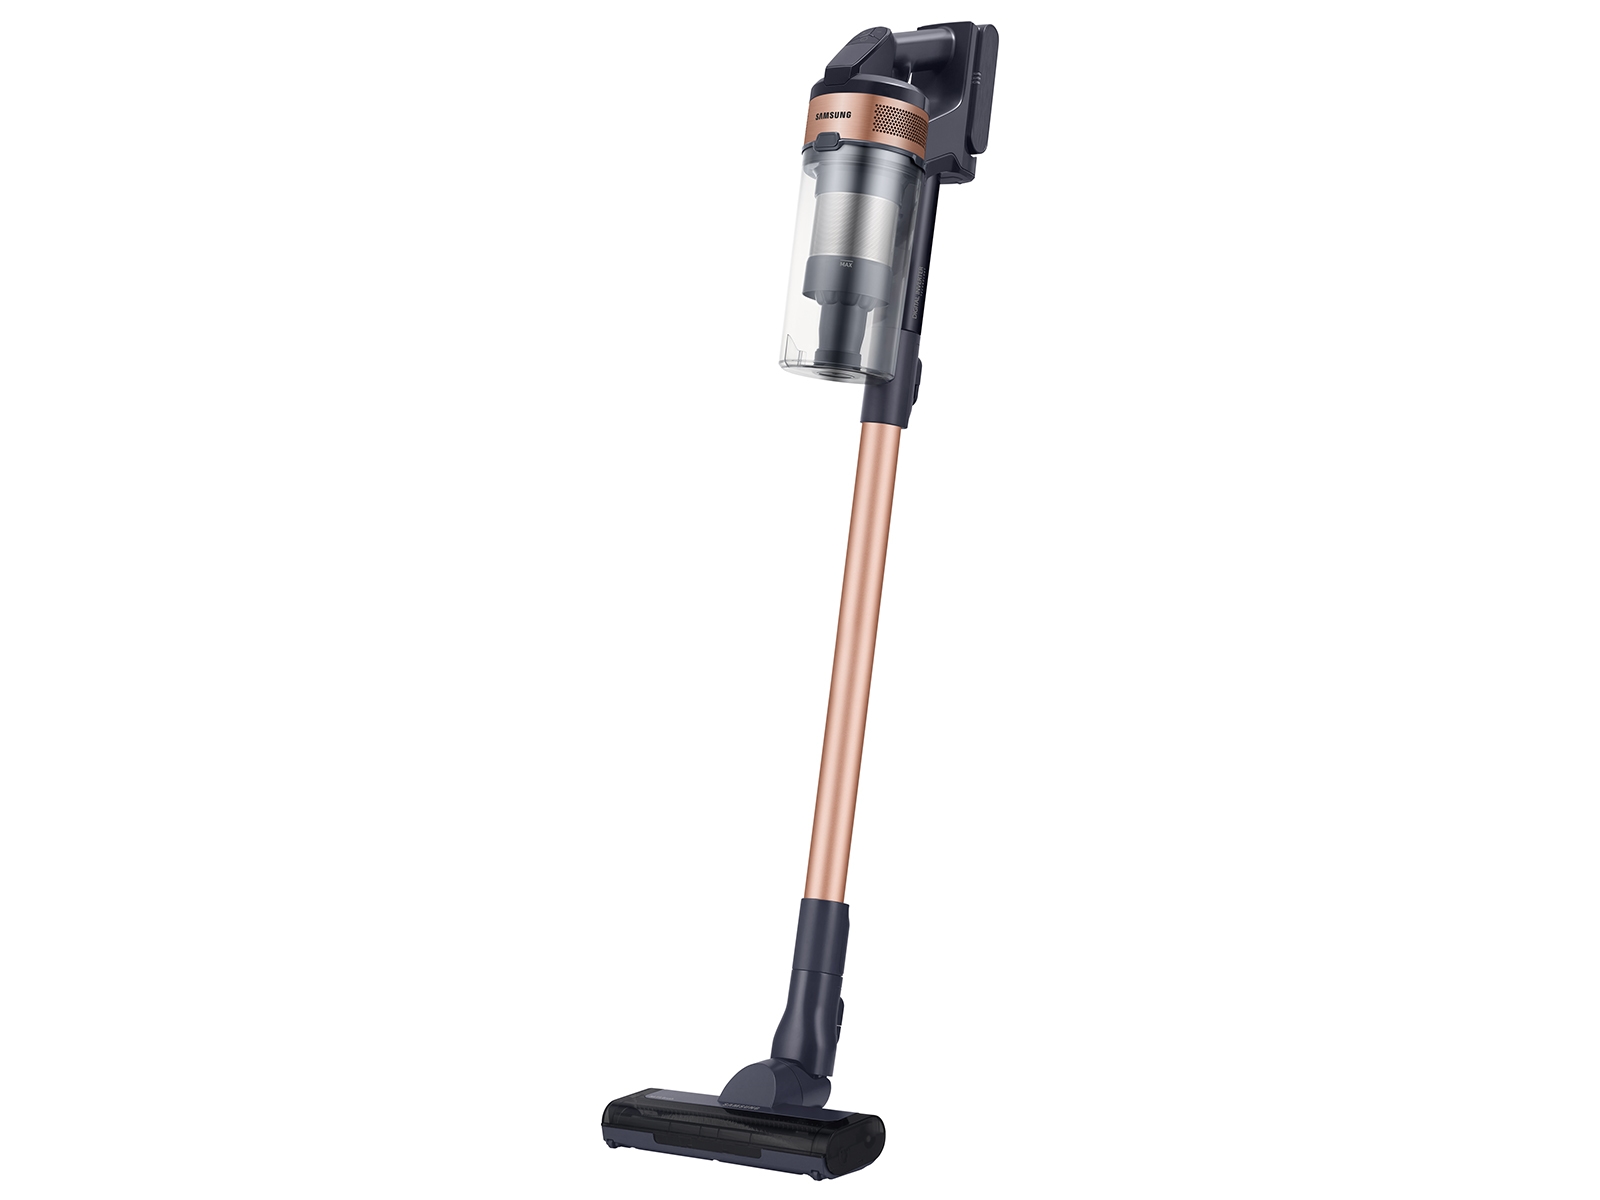 This Cordless Vacuum Cleaner That's 'Packed with Power' Is 50% Off